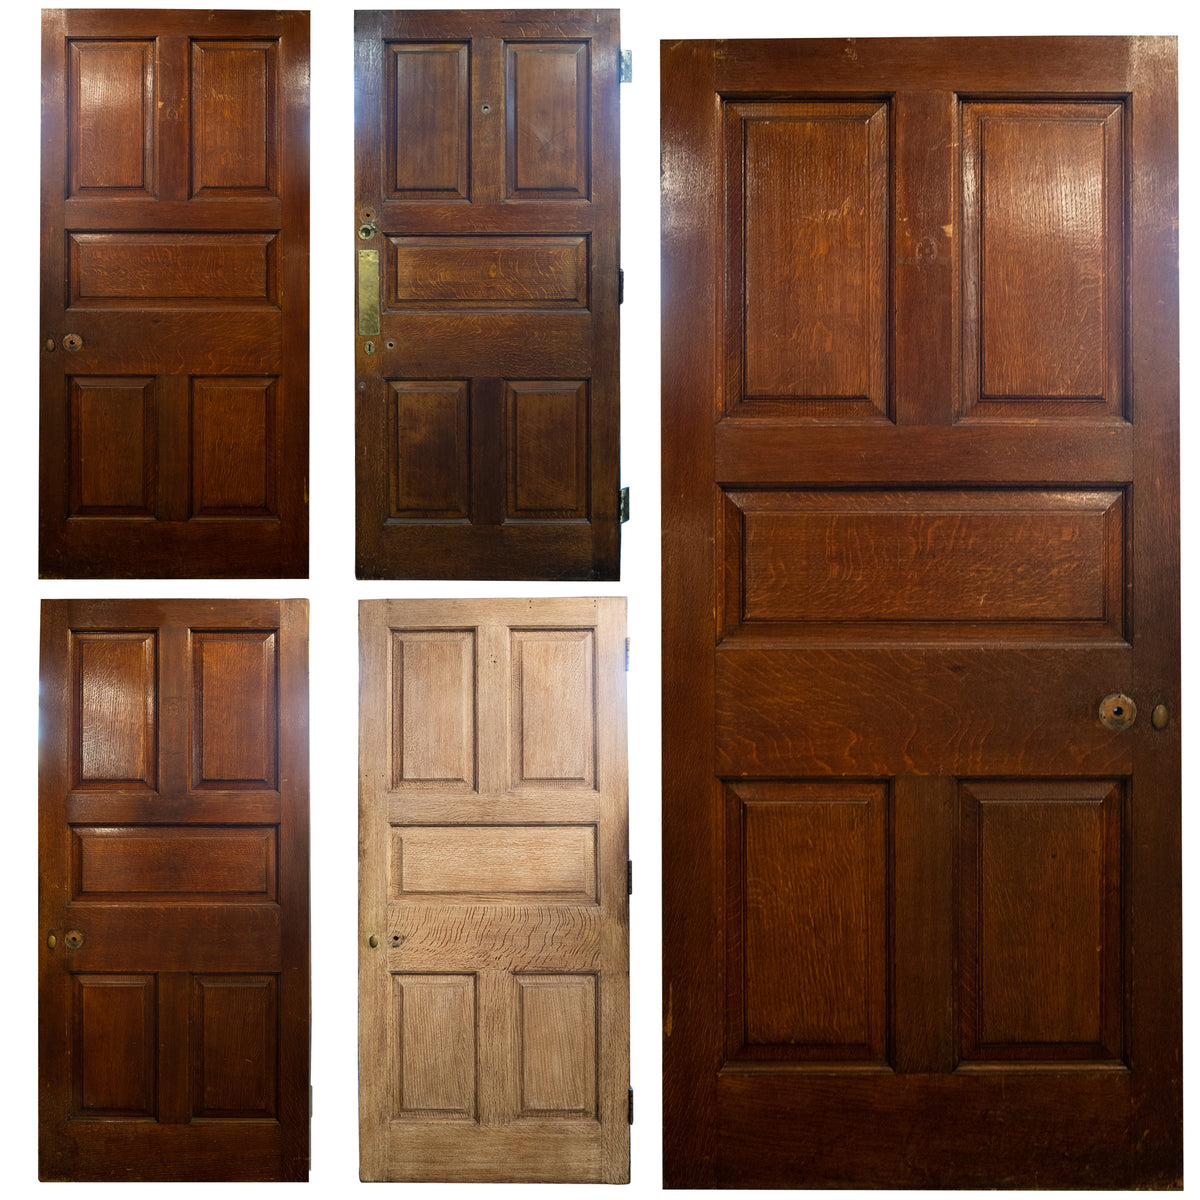 Splendid Solid Oak Doors Reclaimed from Mercers&#39; Hall London | The Architectural Forum